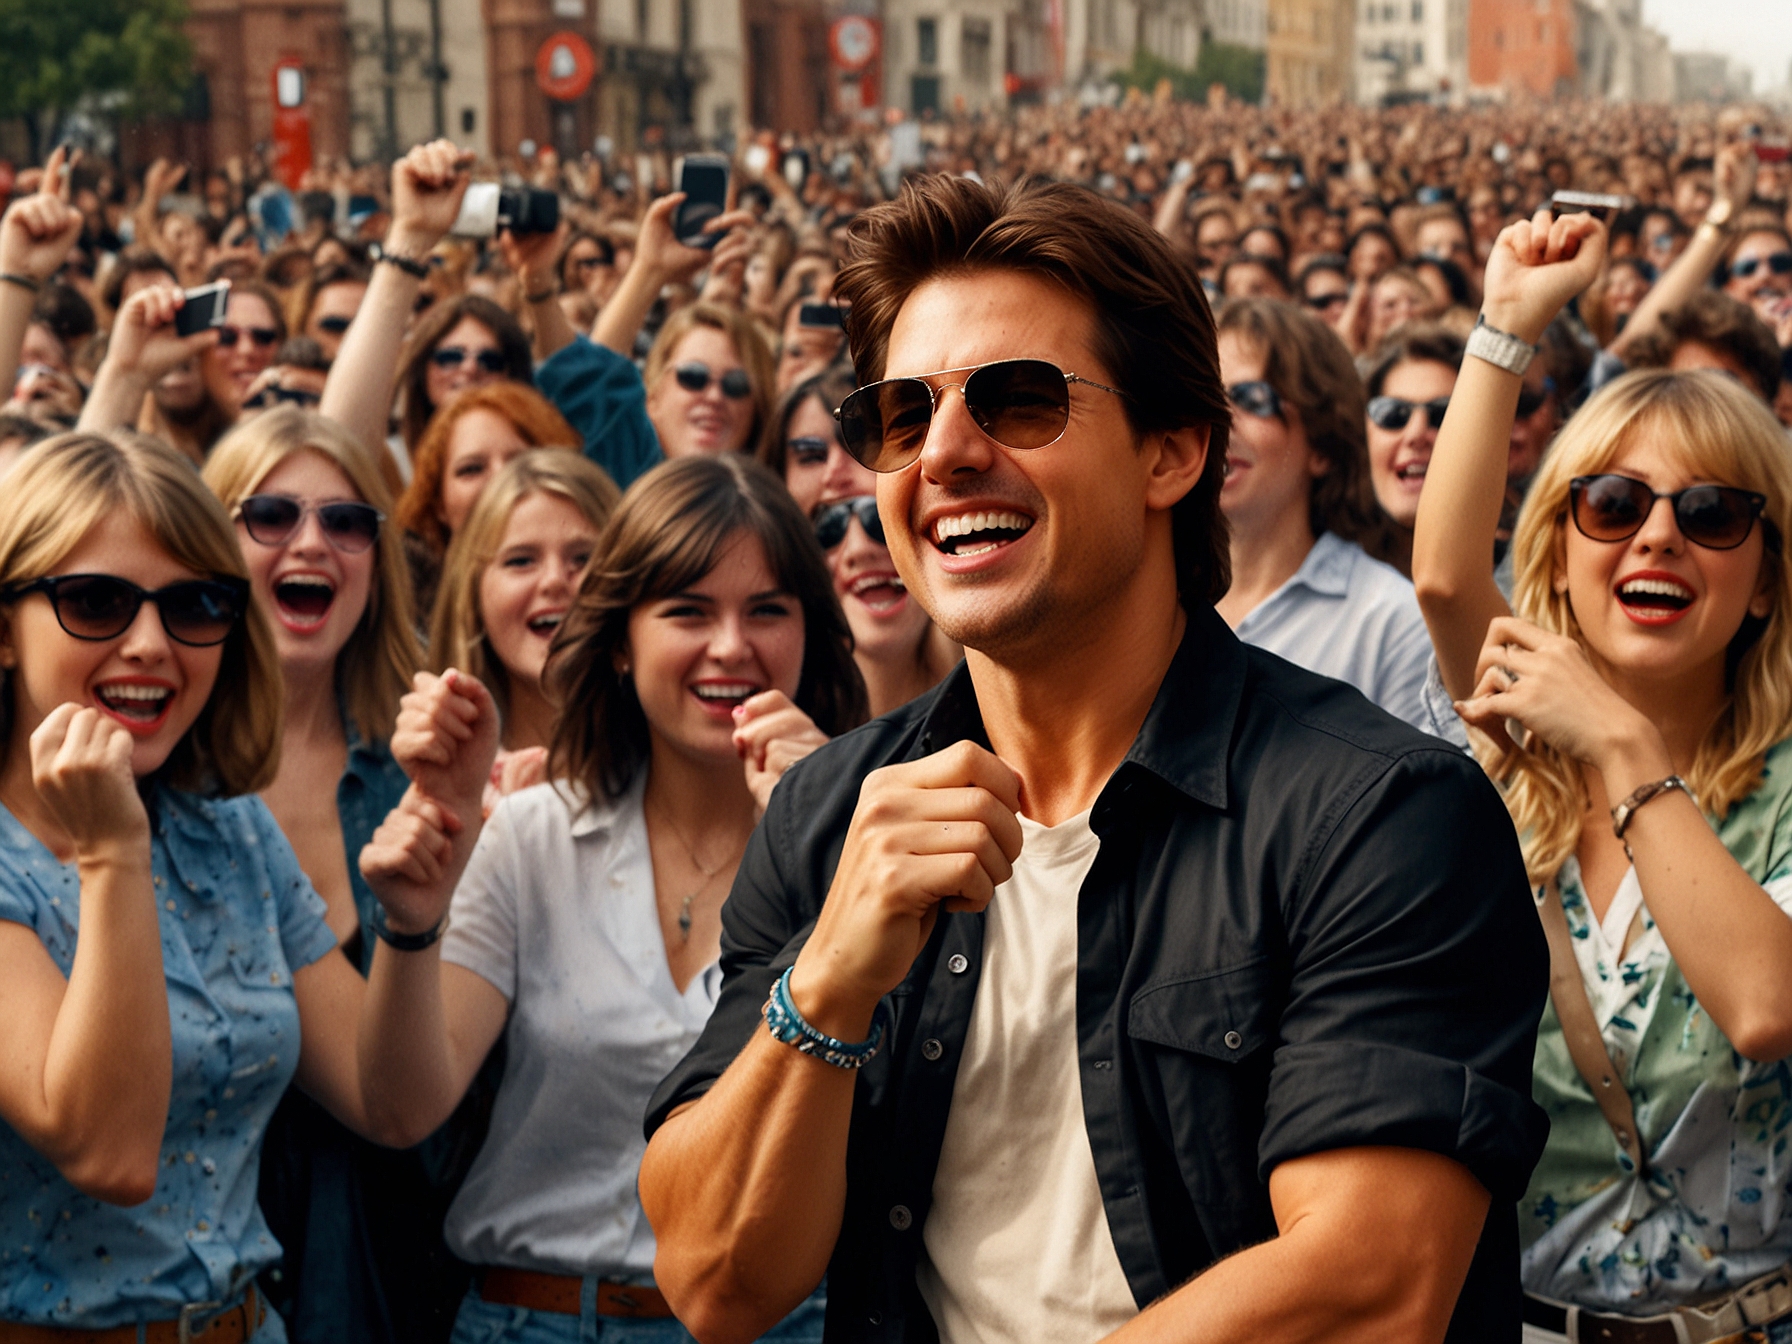 Tom Cruise, casually dressed and wearing sunglasses, exchanges friendship bracelets with enthusiastic Taylor Swift fans at the London Eras Tour, blending seamlessly into the crowd.